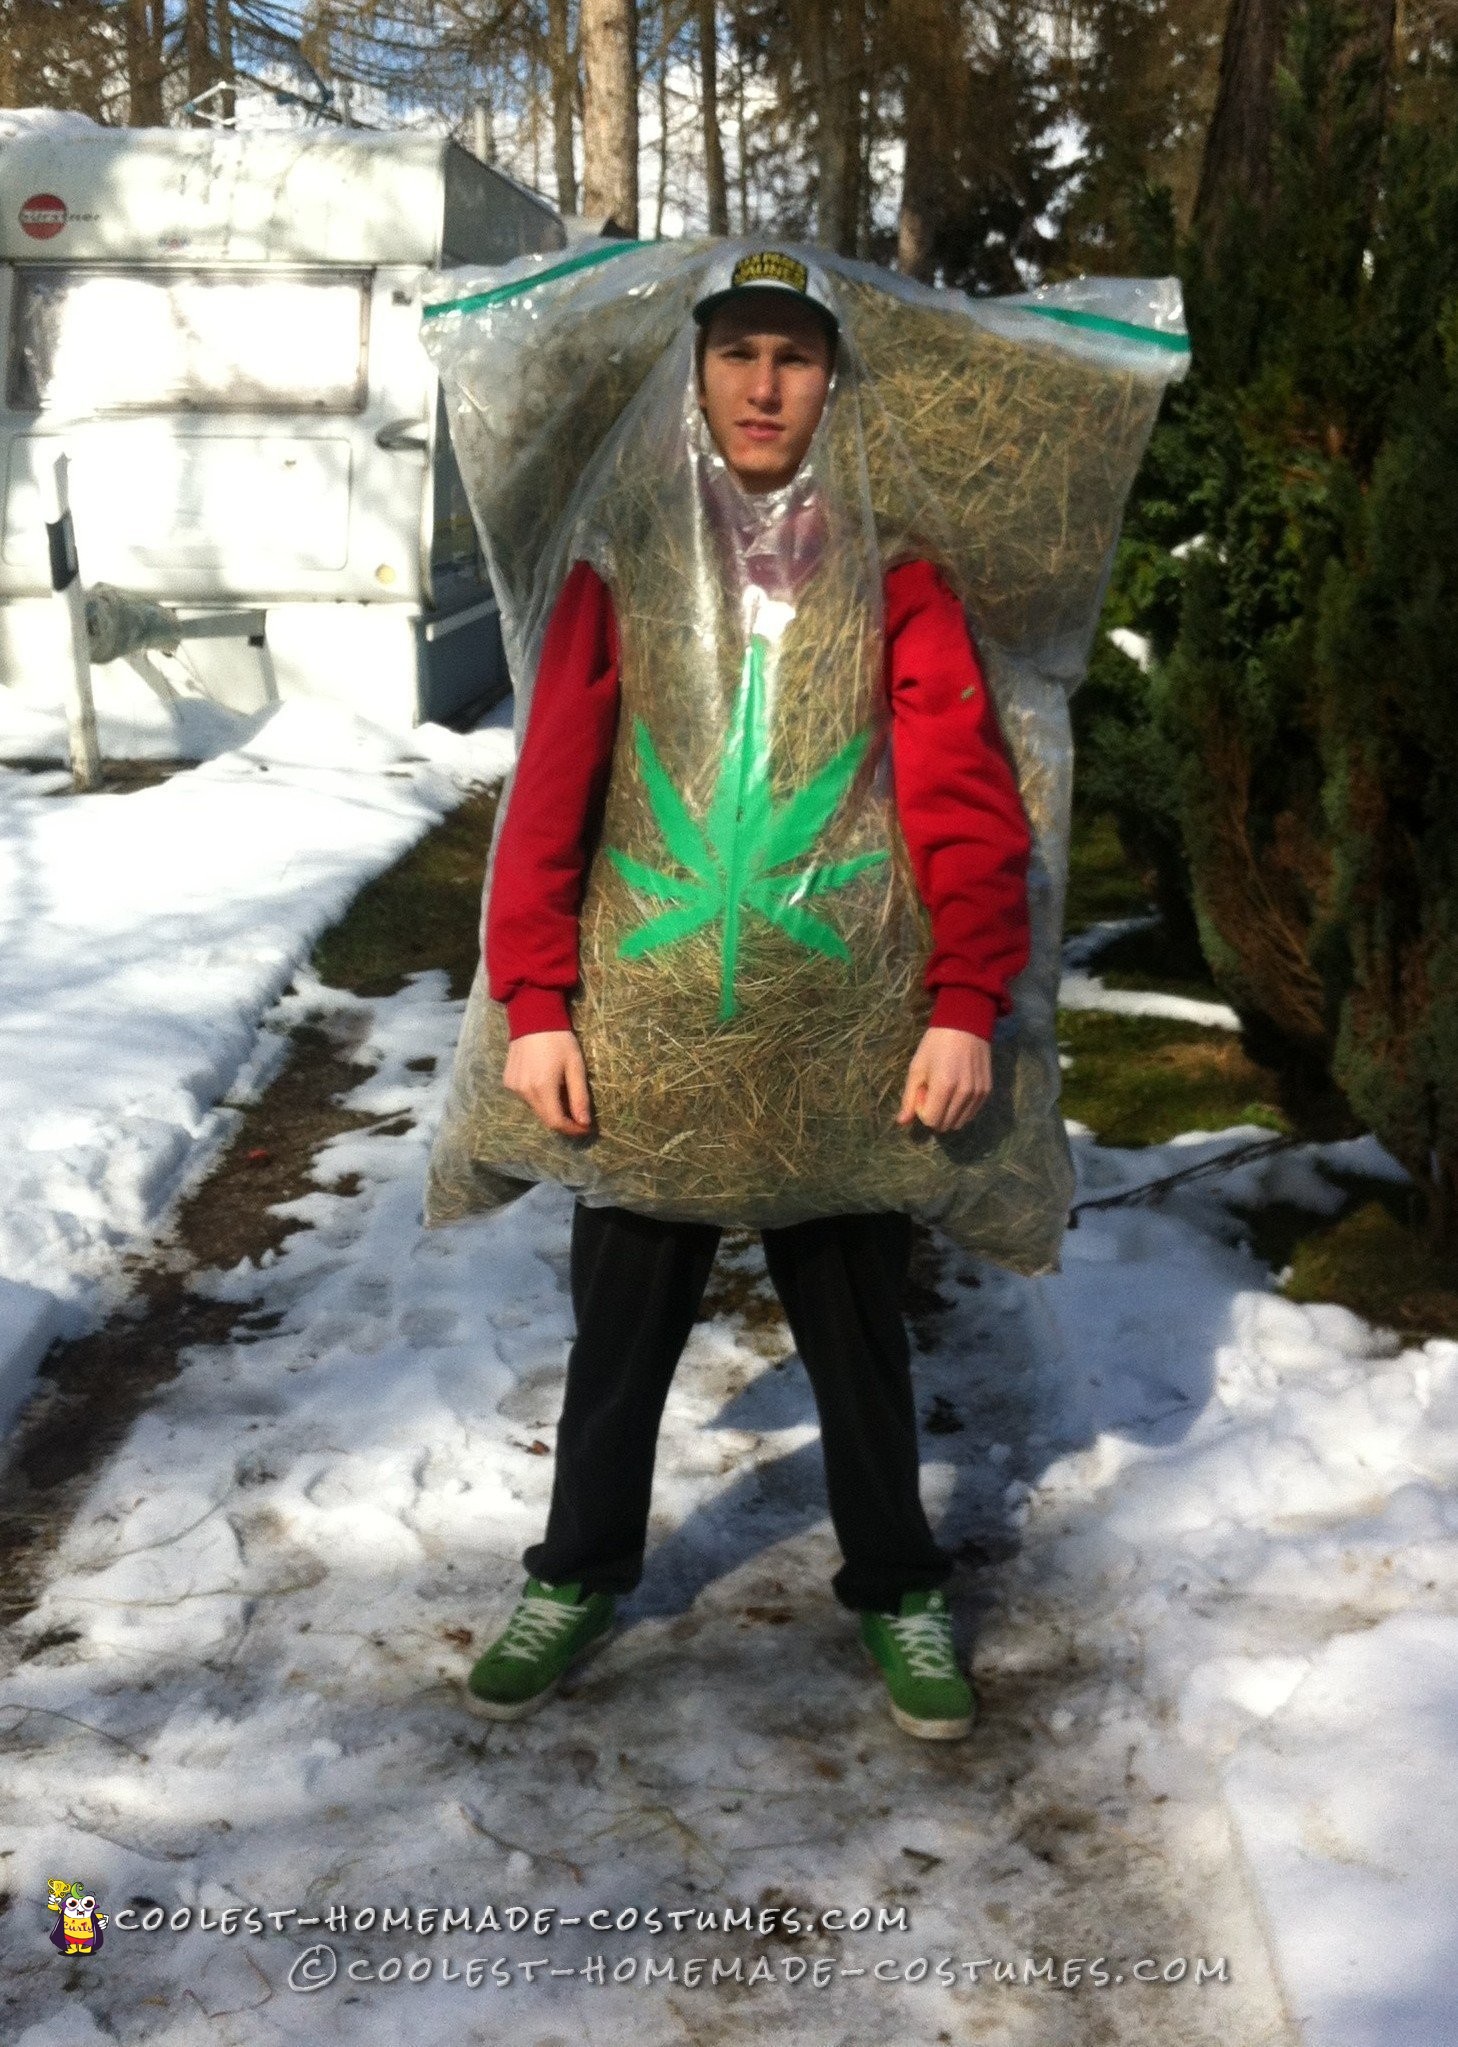 Hilarious Homemade Bag of Weed Costume!